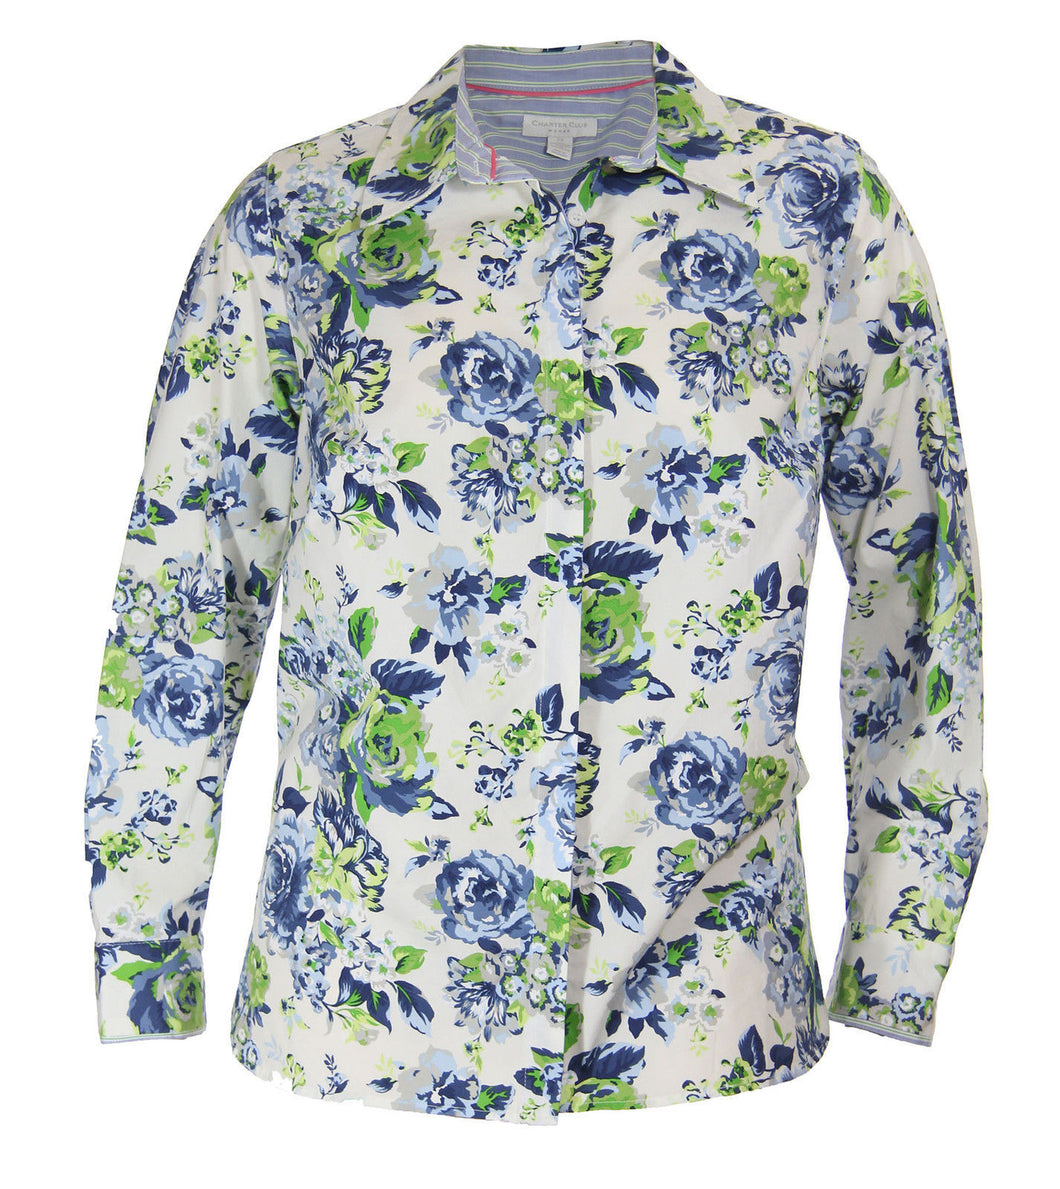 Charter Club Multi Color Floral Print Long Sleeve Button Down Shirt